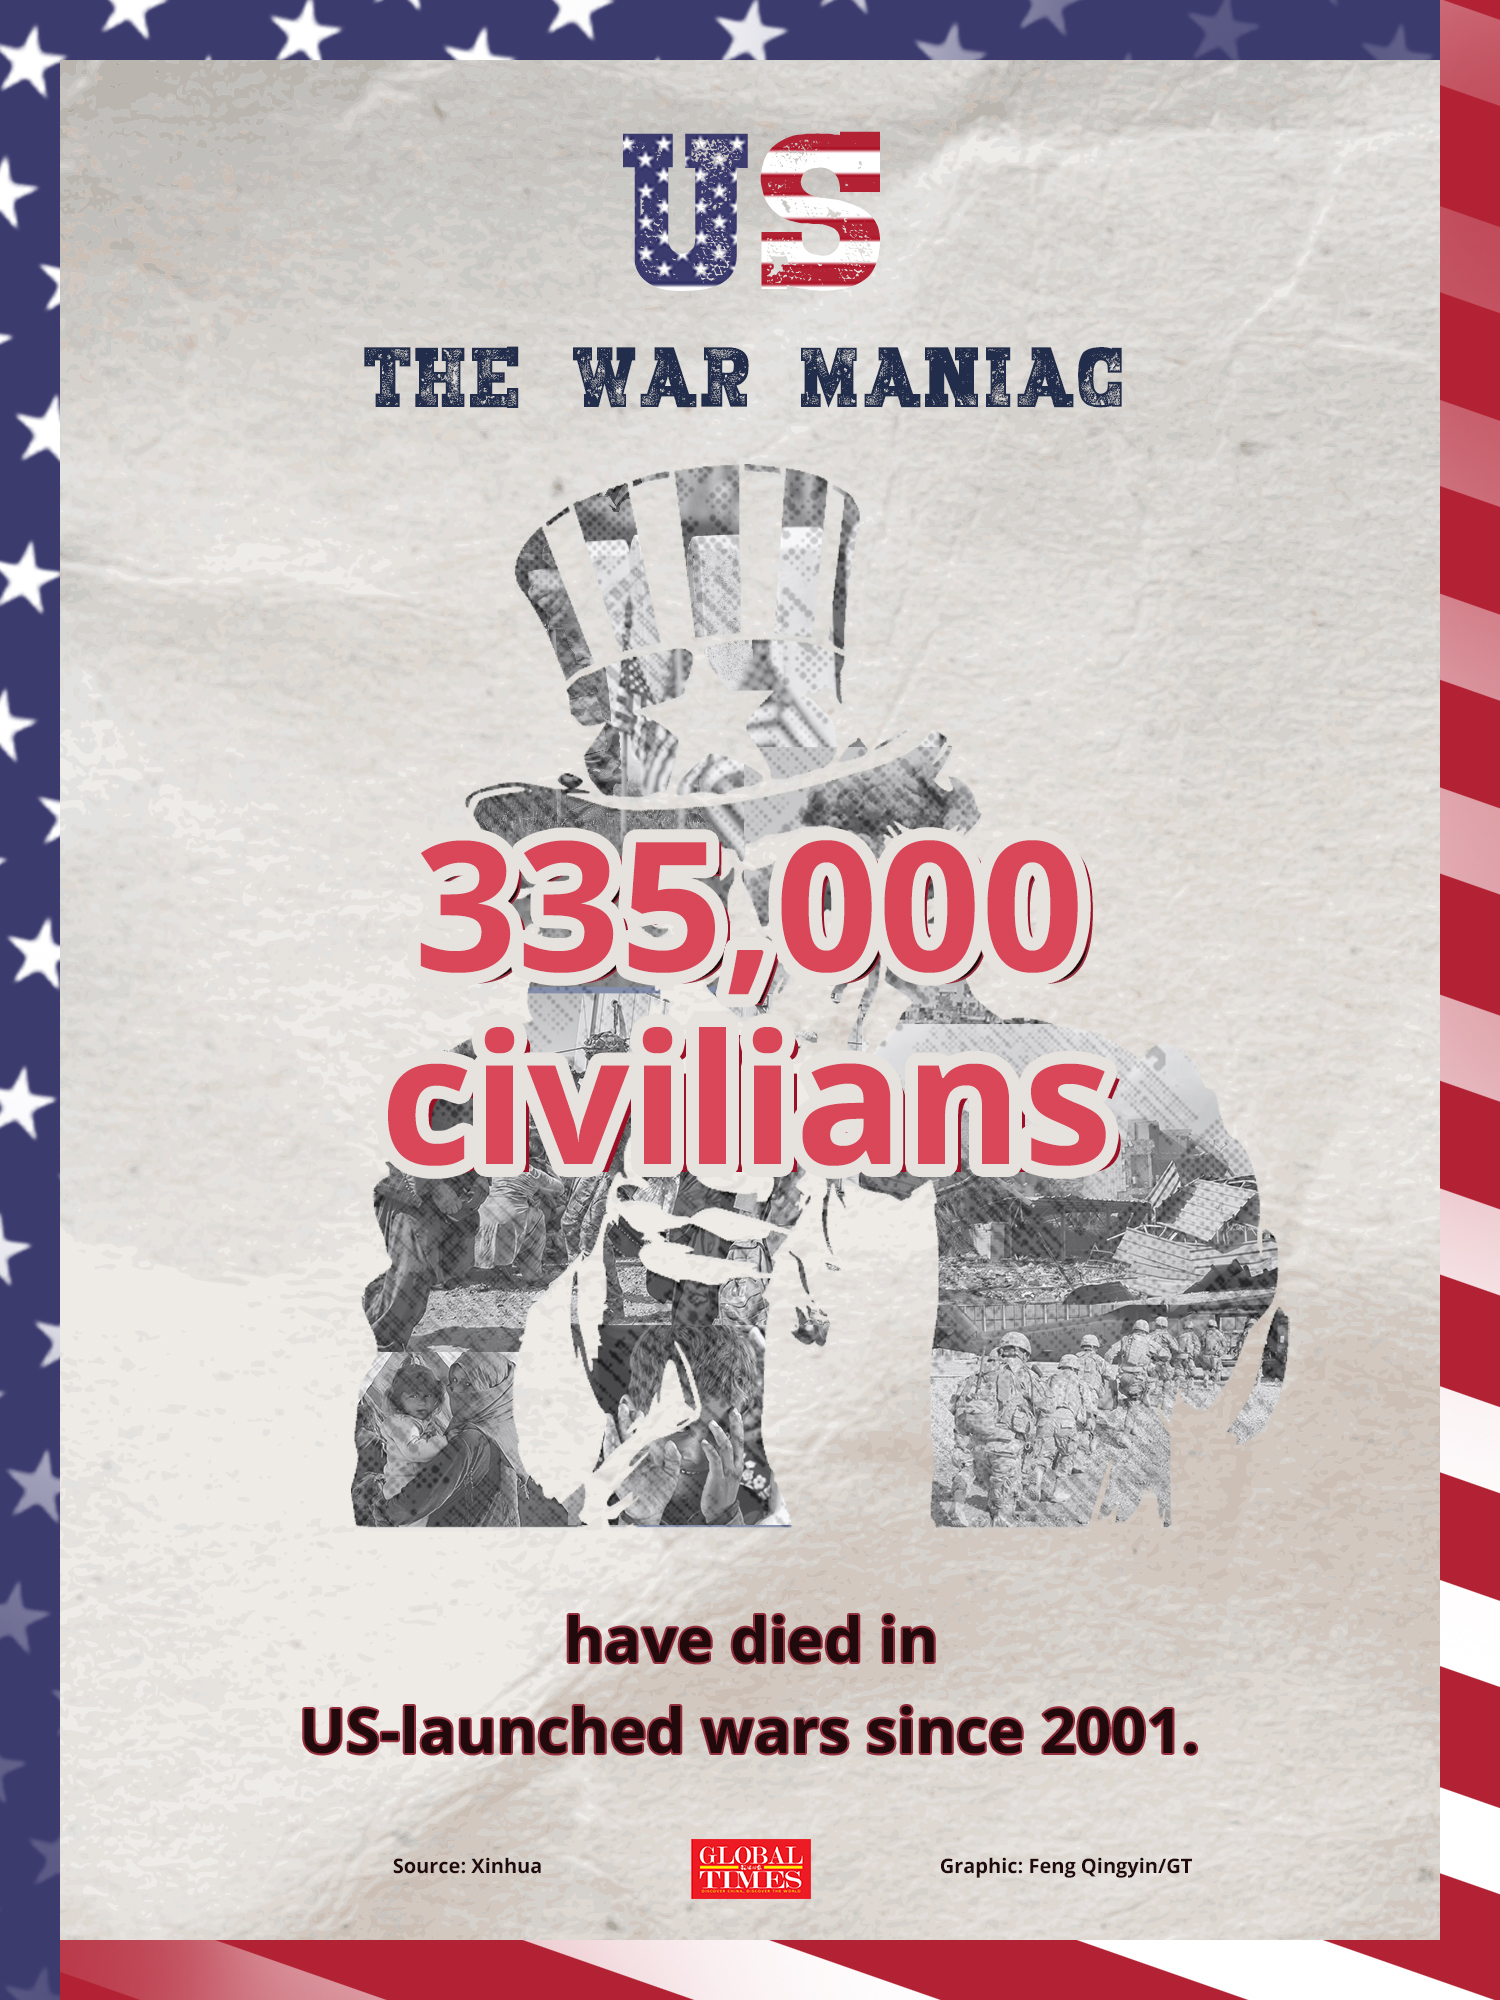 Why is the US a true war maniac?
-80% of armed conflicts in the world were initiated by the US since 1945
-Only 16 years out of 240 years of American history have been without wars
-335,000 civilians died in the wars launched by the US
Graphic: Feng Qingyin/GT